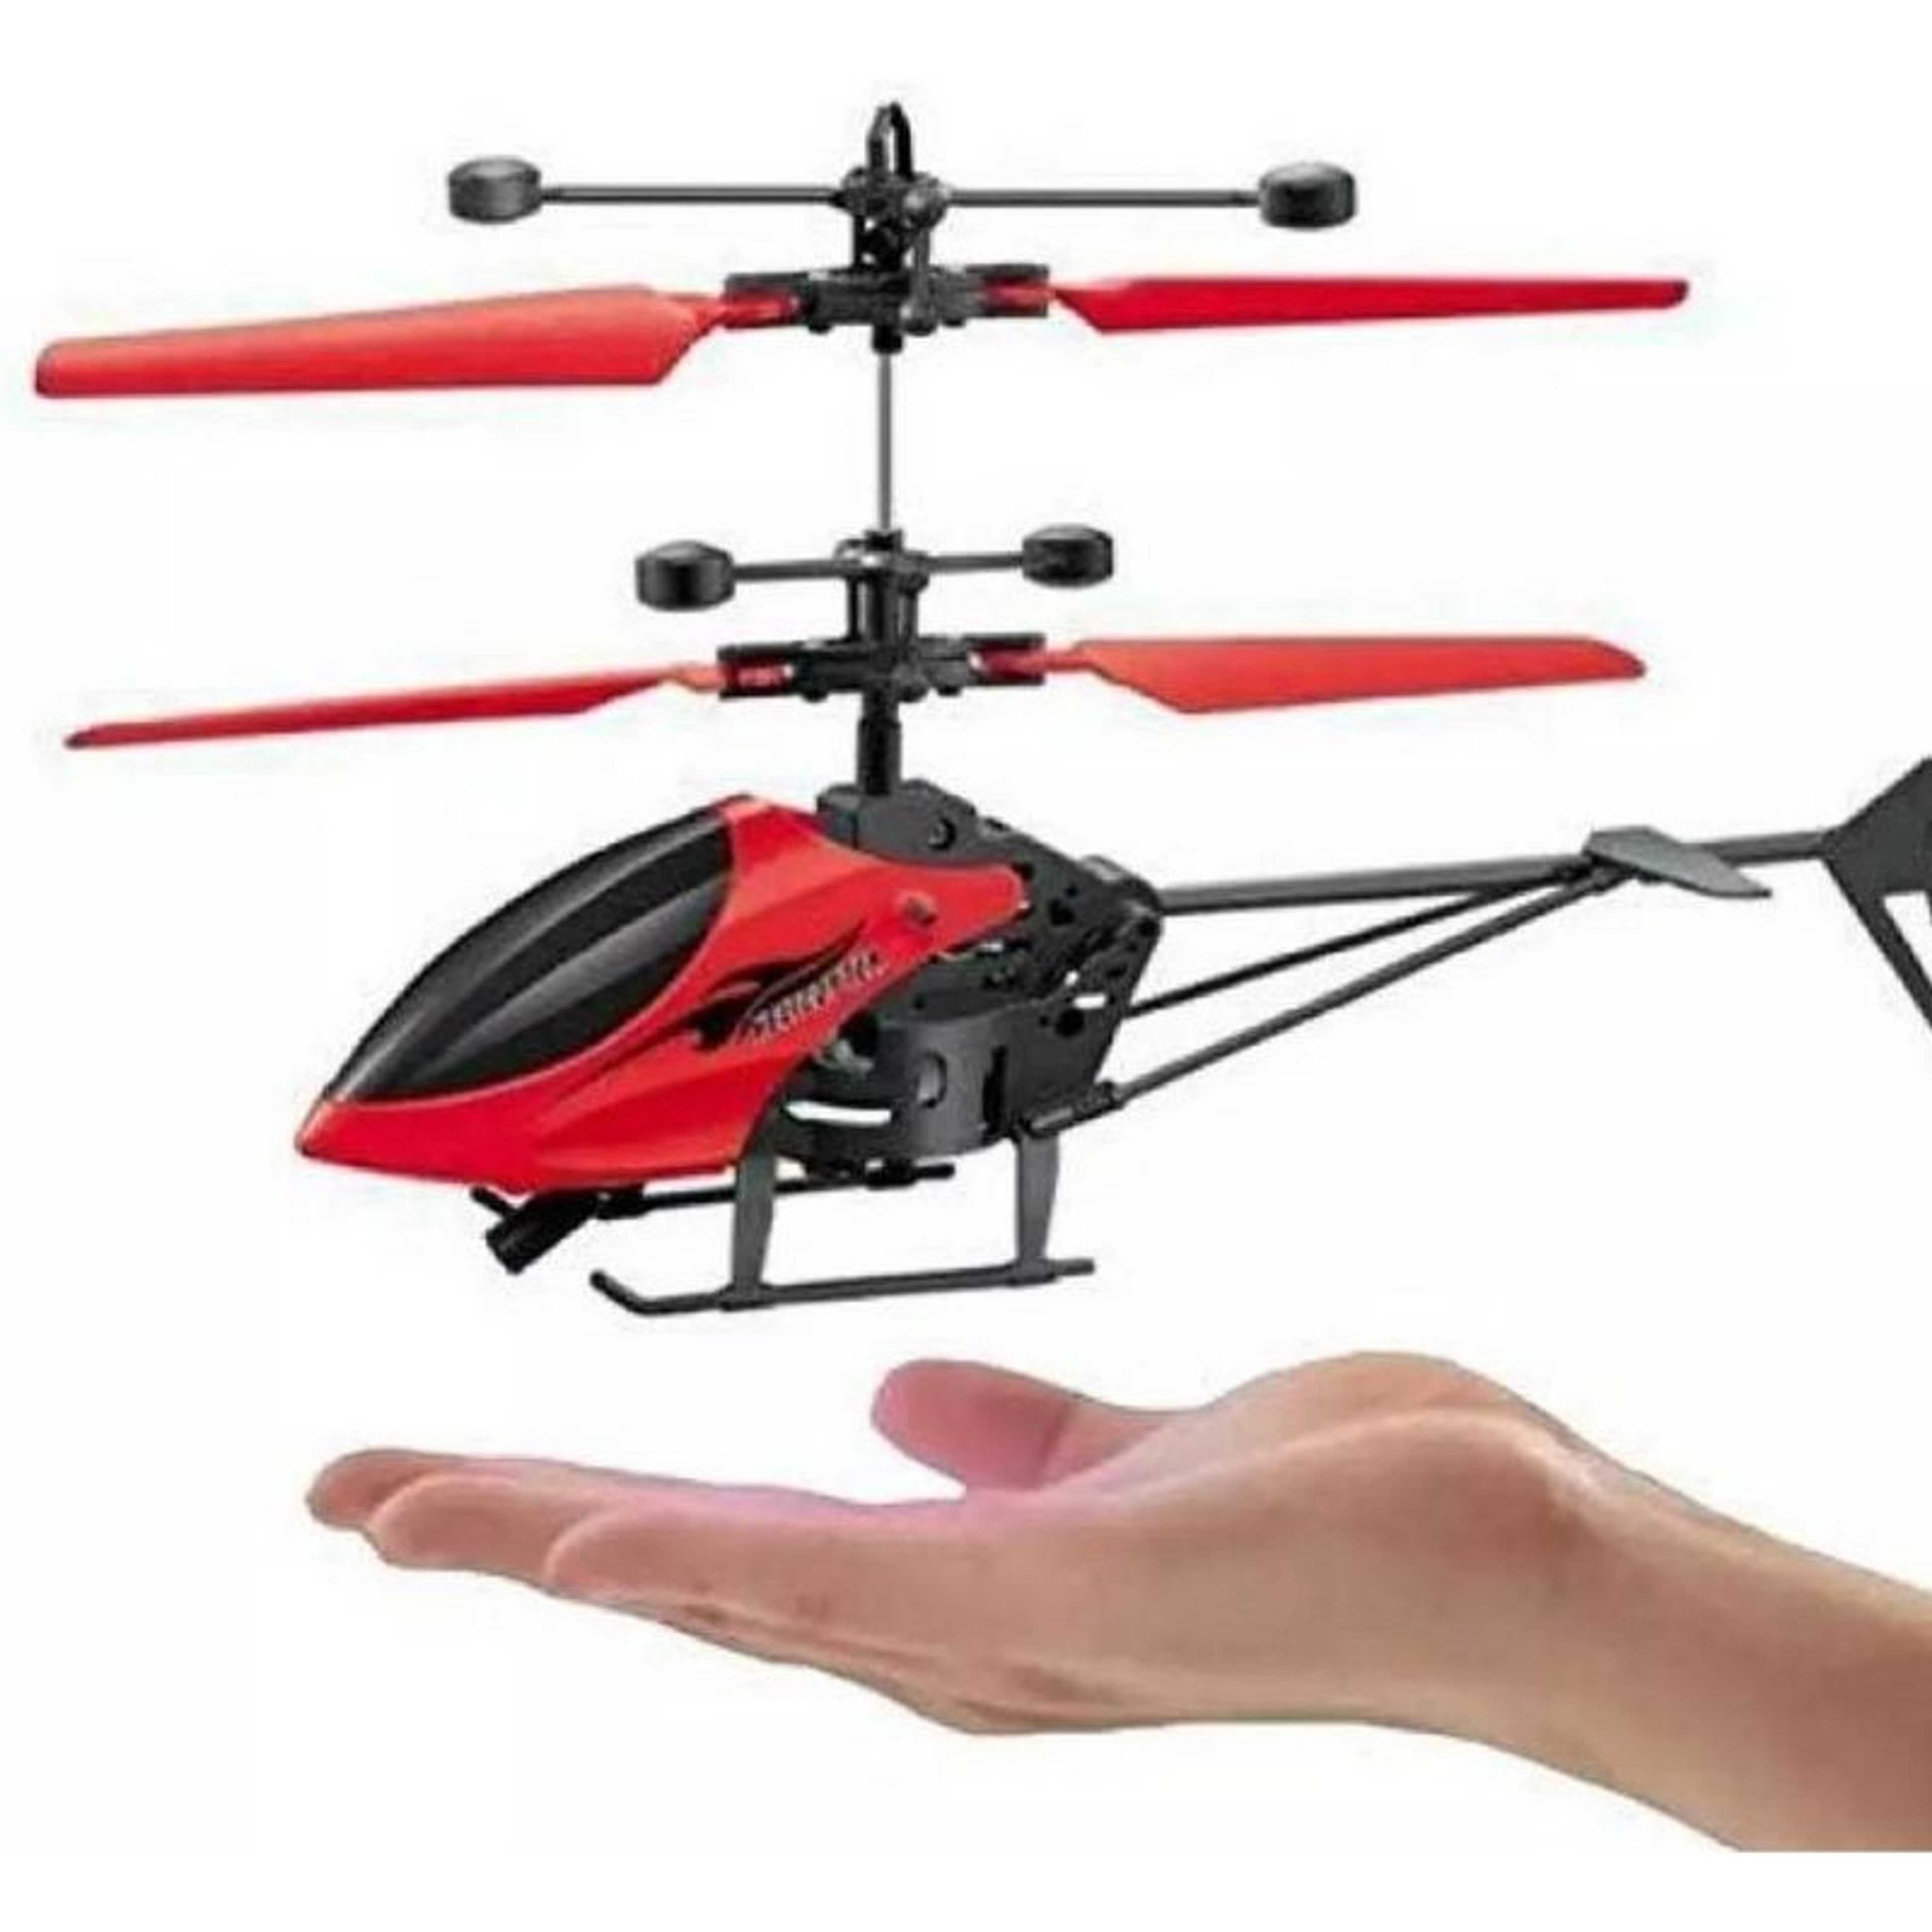 Flying helicopter with USB Charging Cable Toy for kids,boys n girls age5+